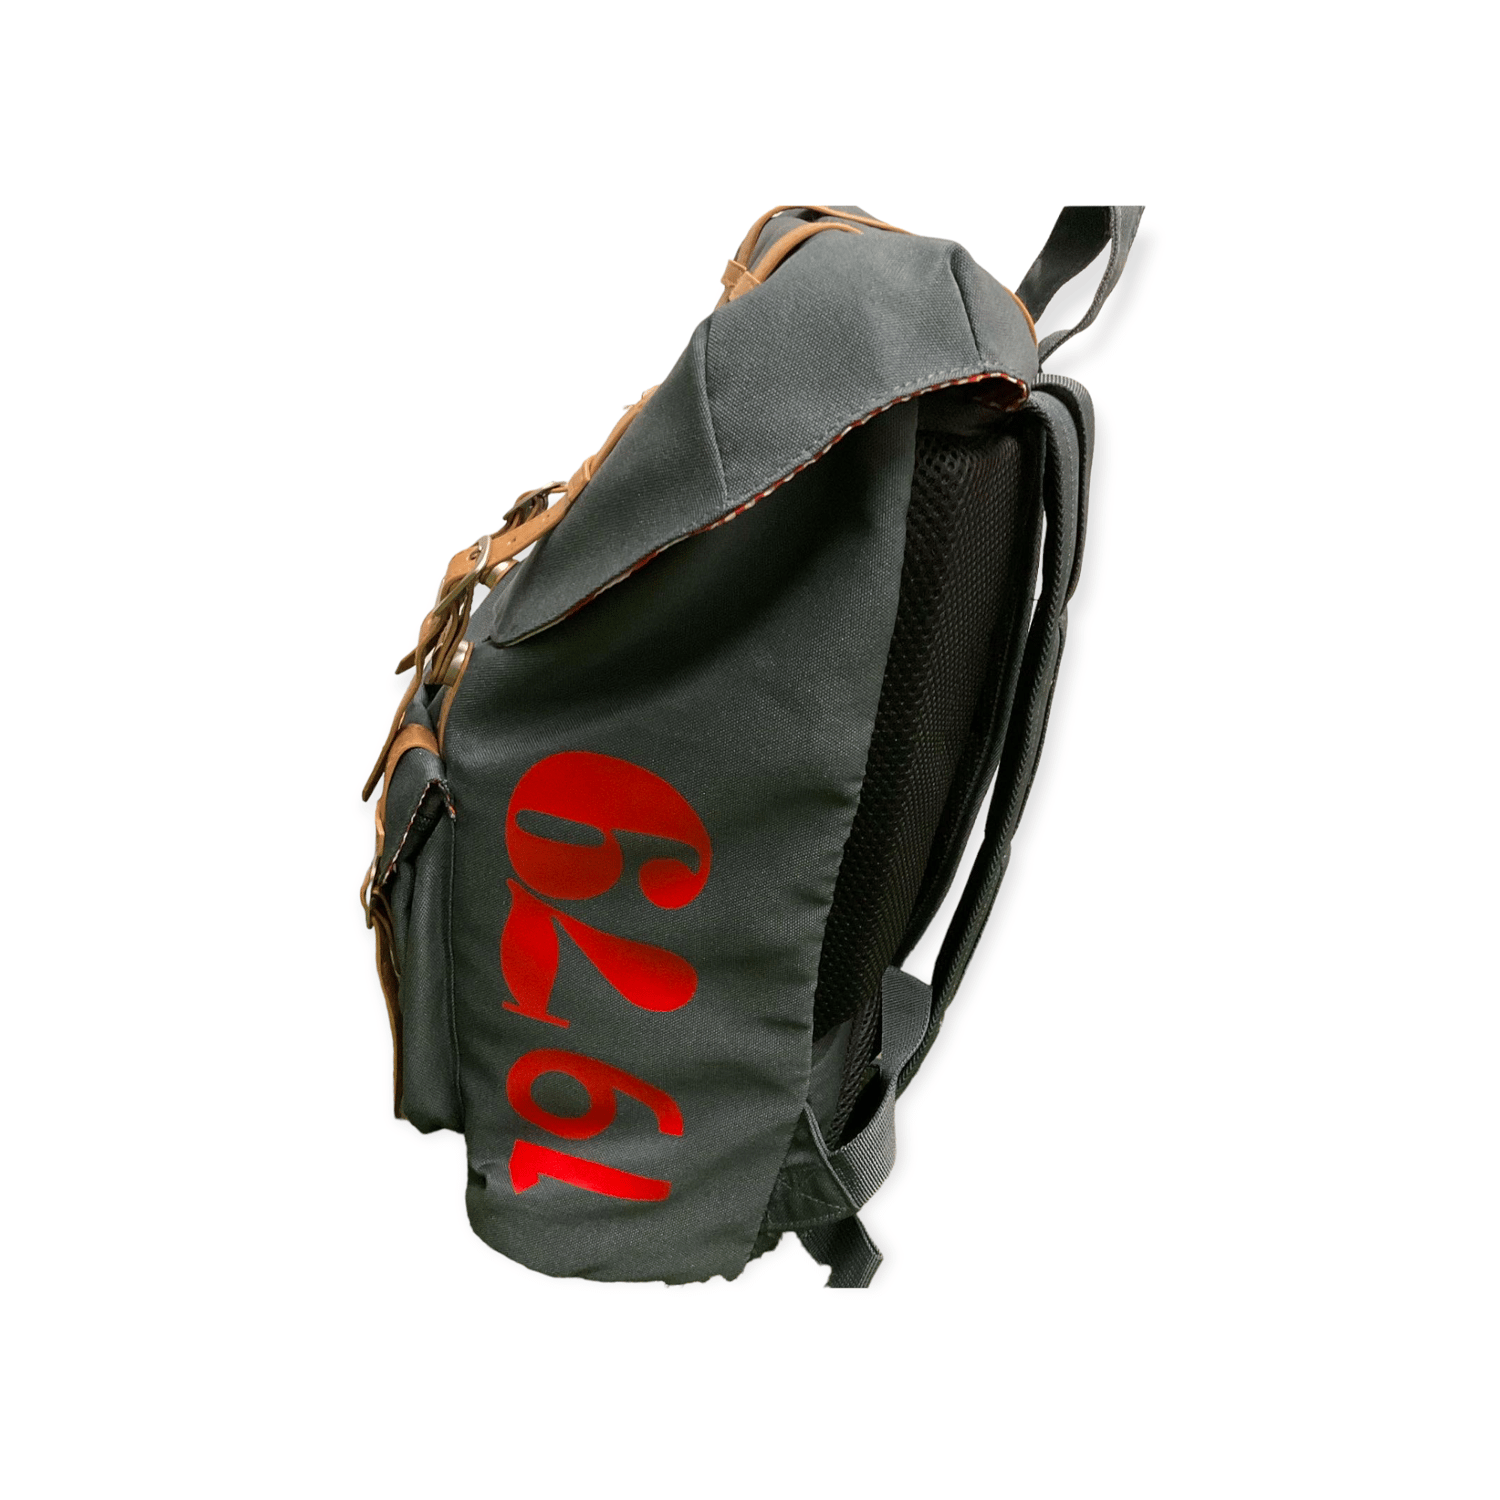 Image of The EveryDayer Backpack by Mista Seven (Grey/Red/White)